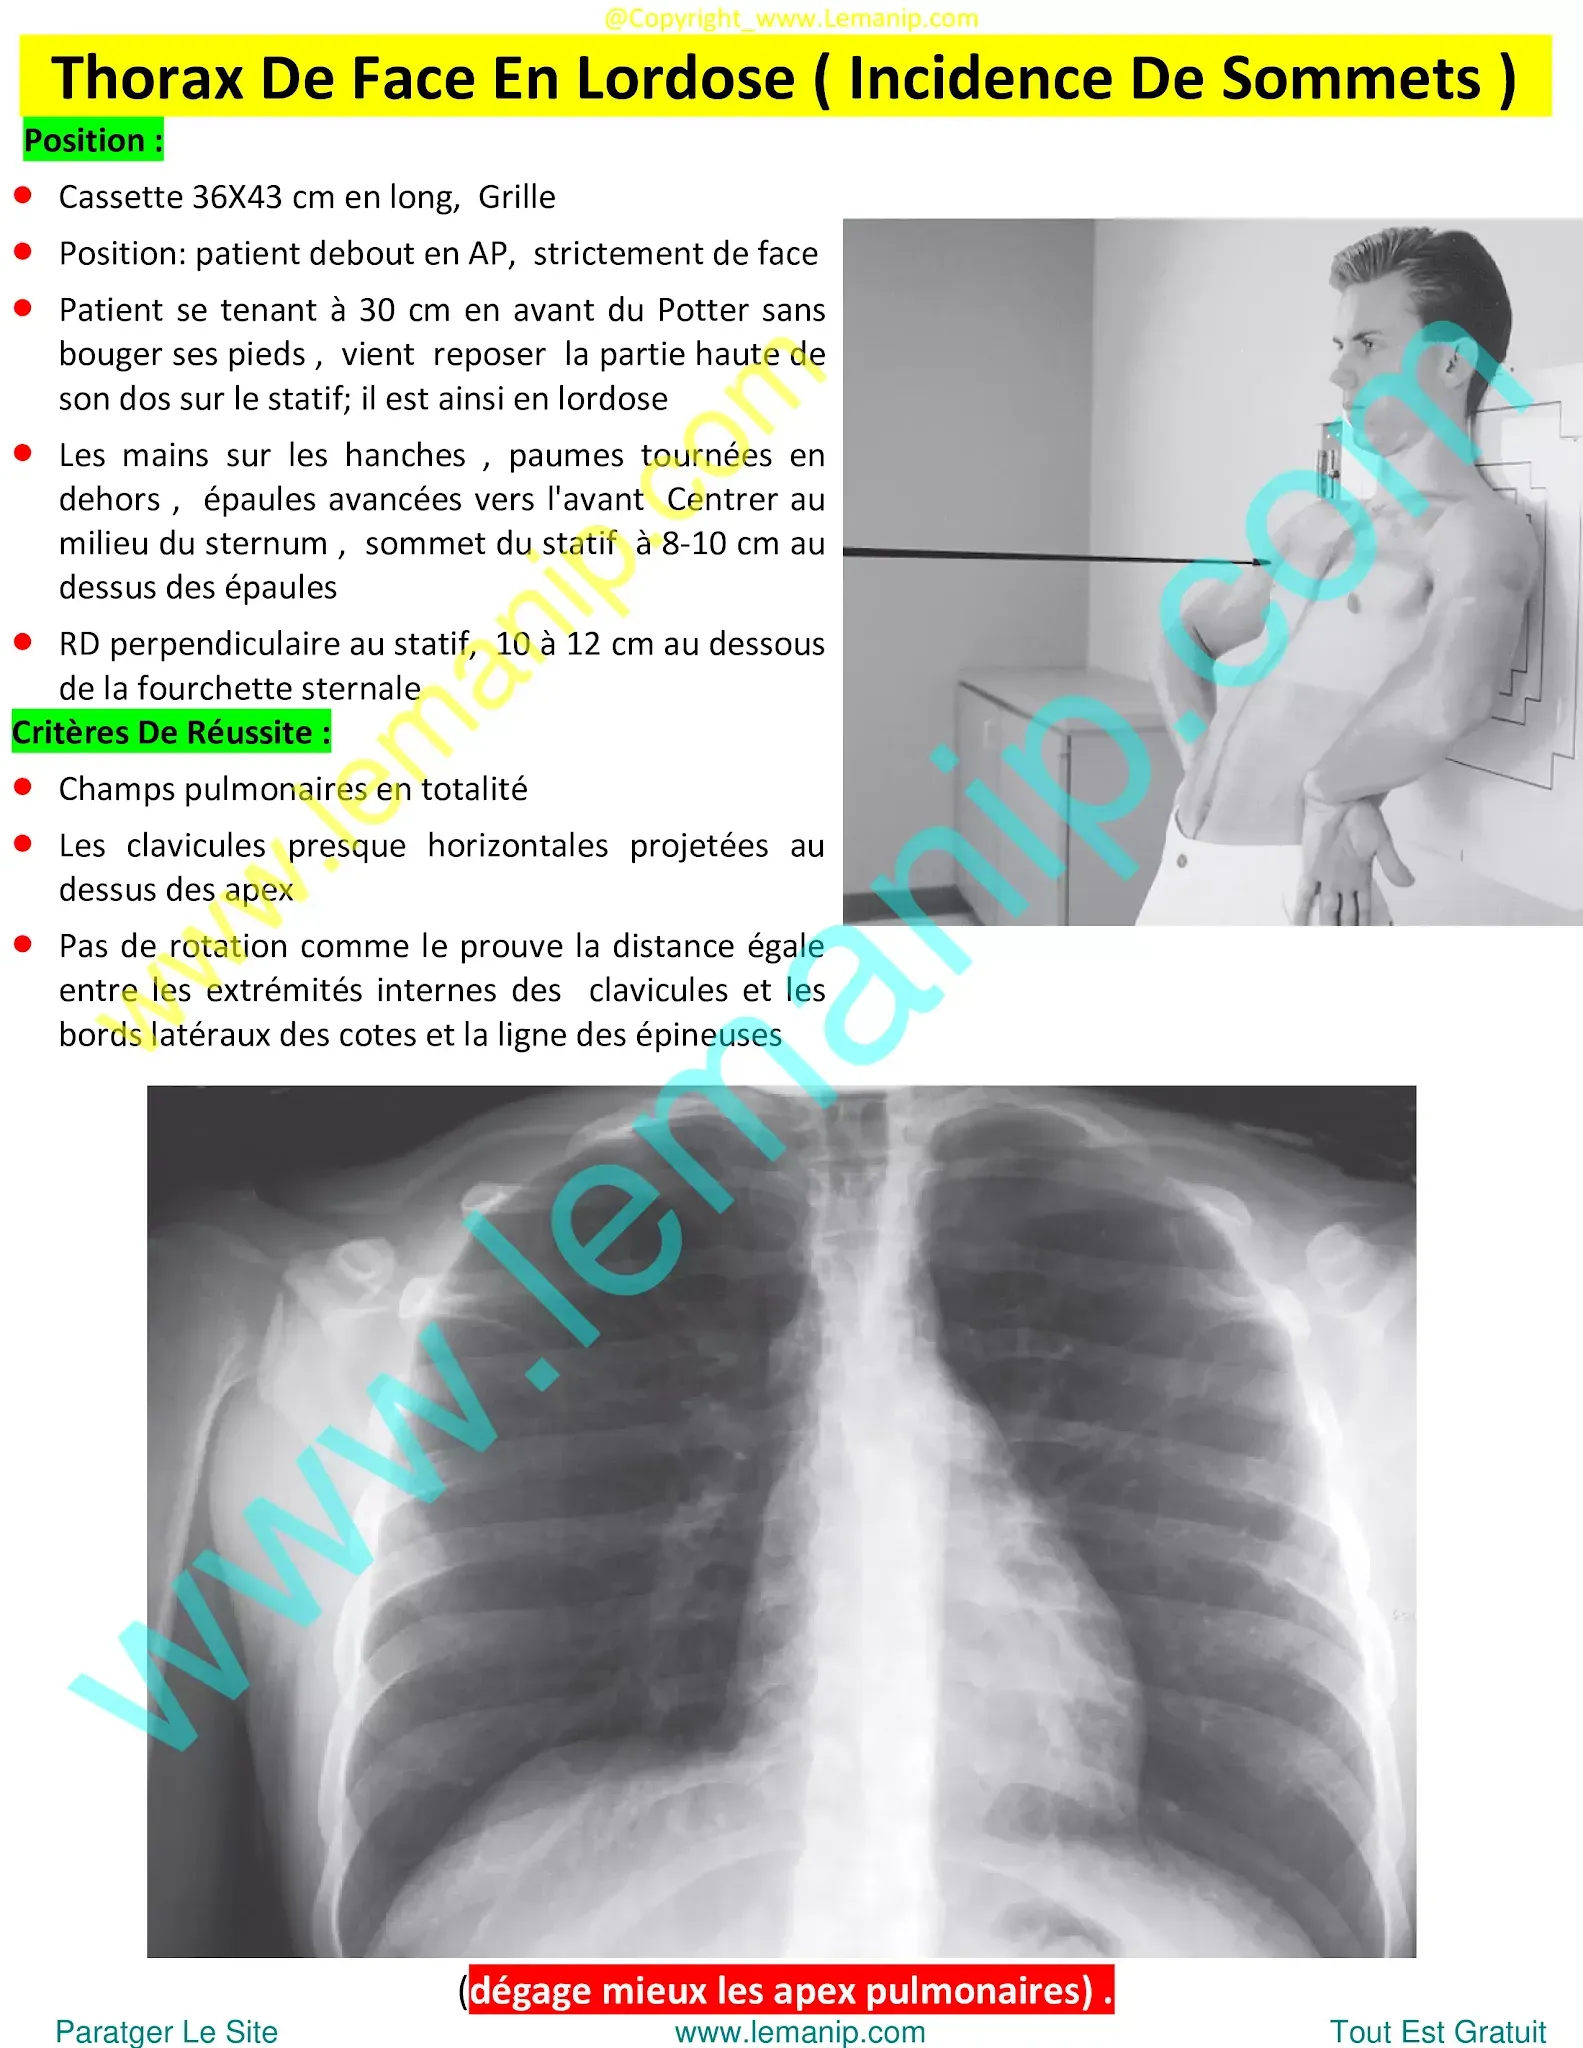 mesothelioma chest x ray,asbestos lung x ray,asthma chest x ray,asthma lungs x ray,urgent care with chest x ray near me,chest xray pa and lateral,ppd chest x ray,chest xray tb,chest x ray pa and lateral,chest xray pa lateral